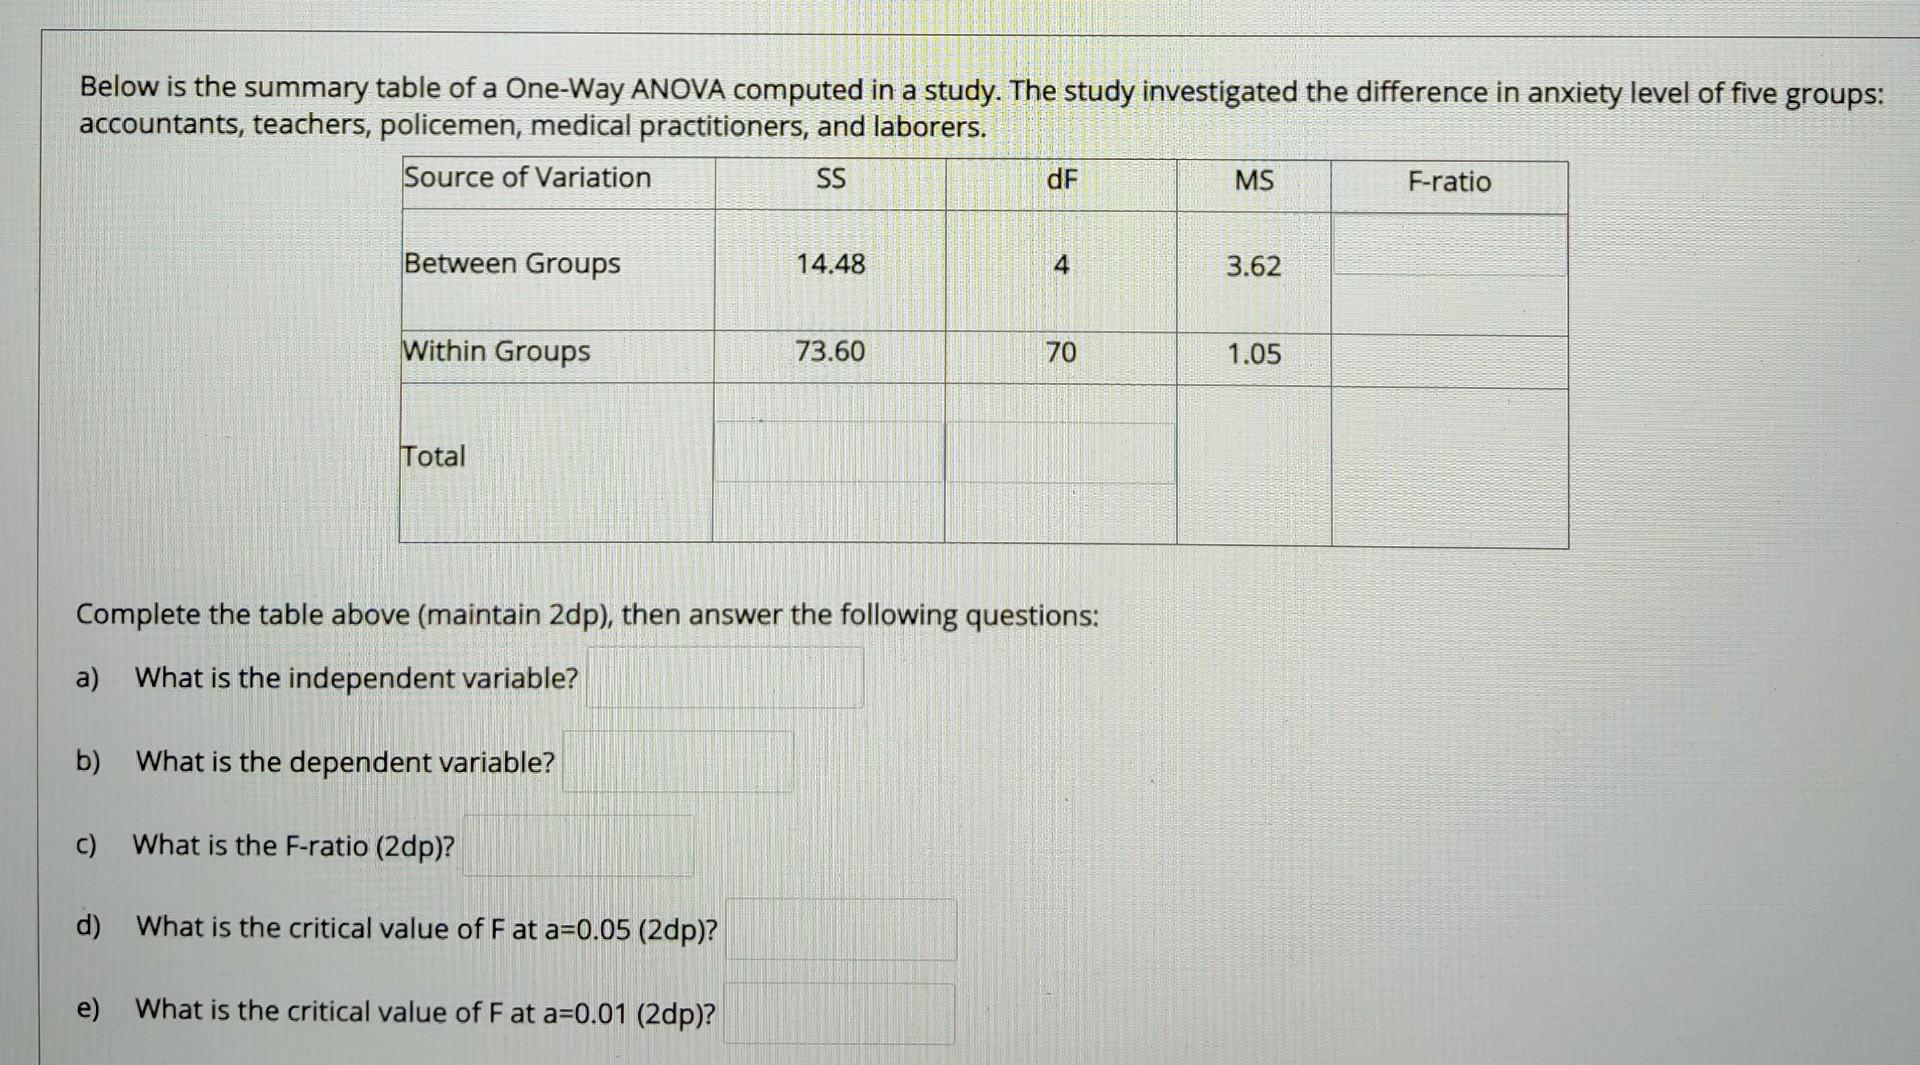 Below is the summary table of a One-Way ANOVA computed in a study. The study investigated the difference in anxiety level of